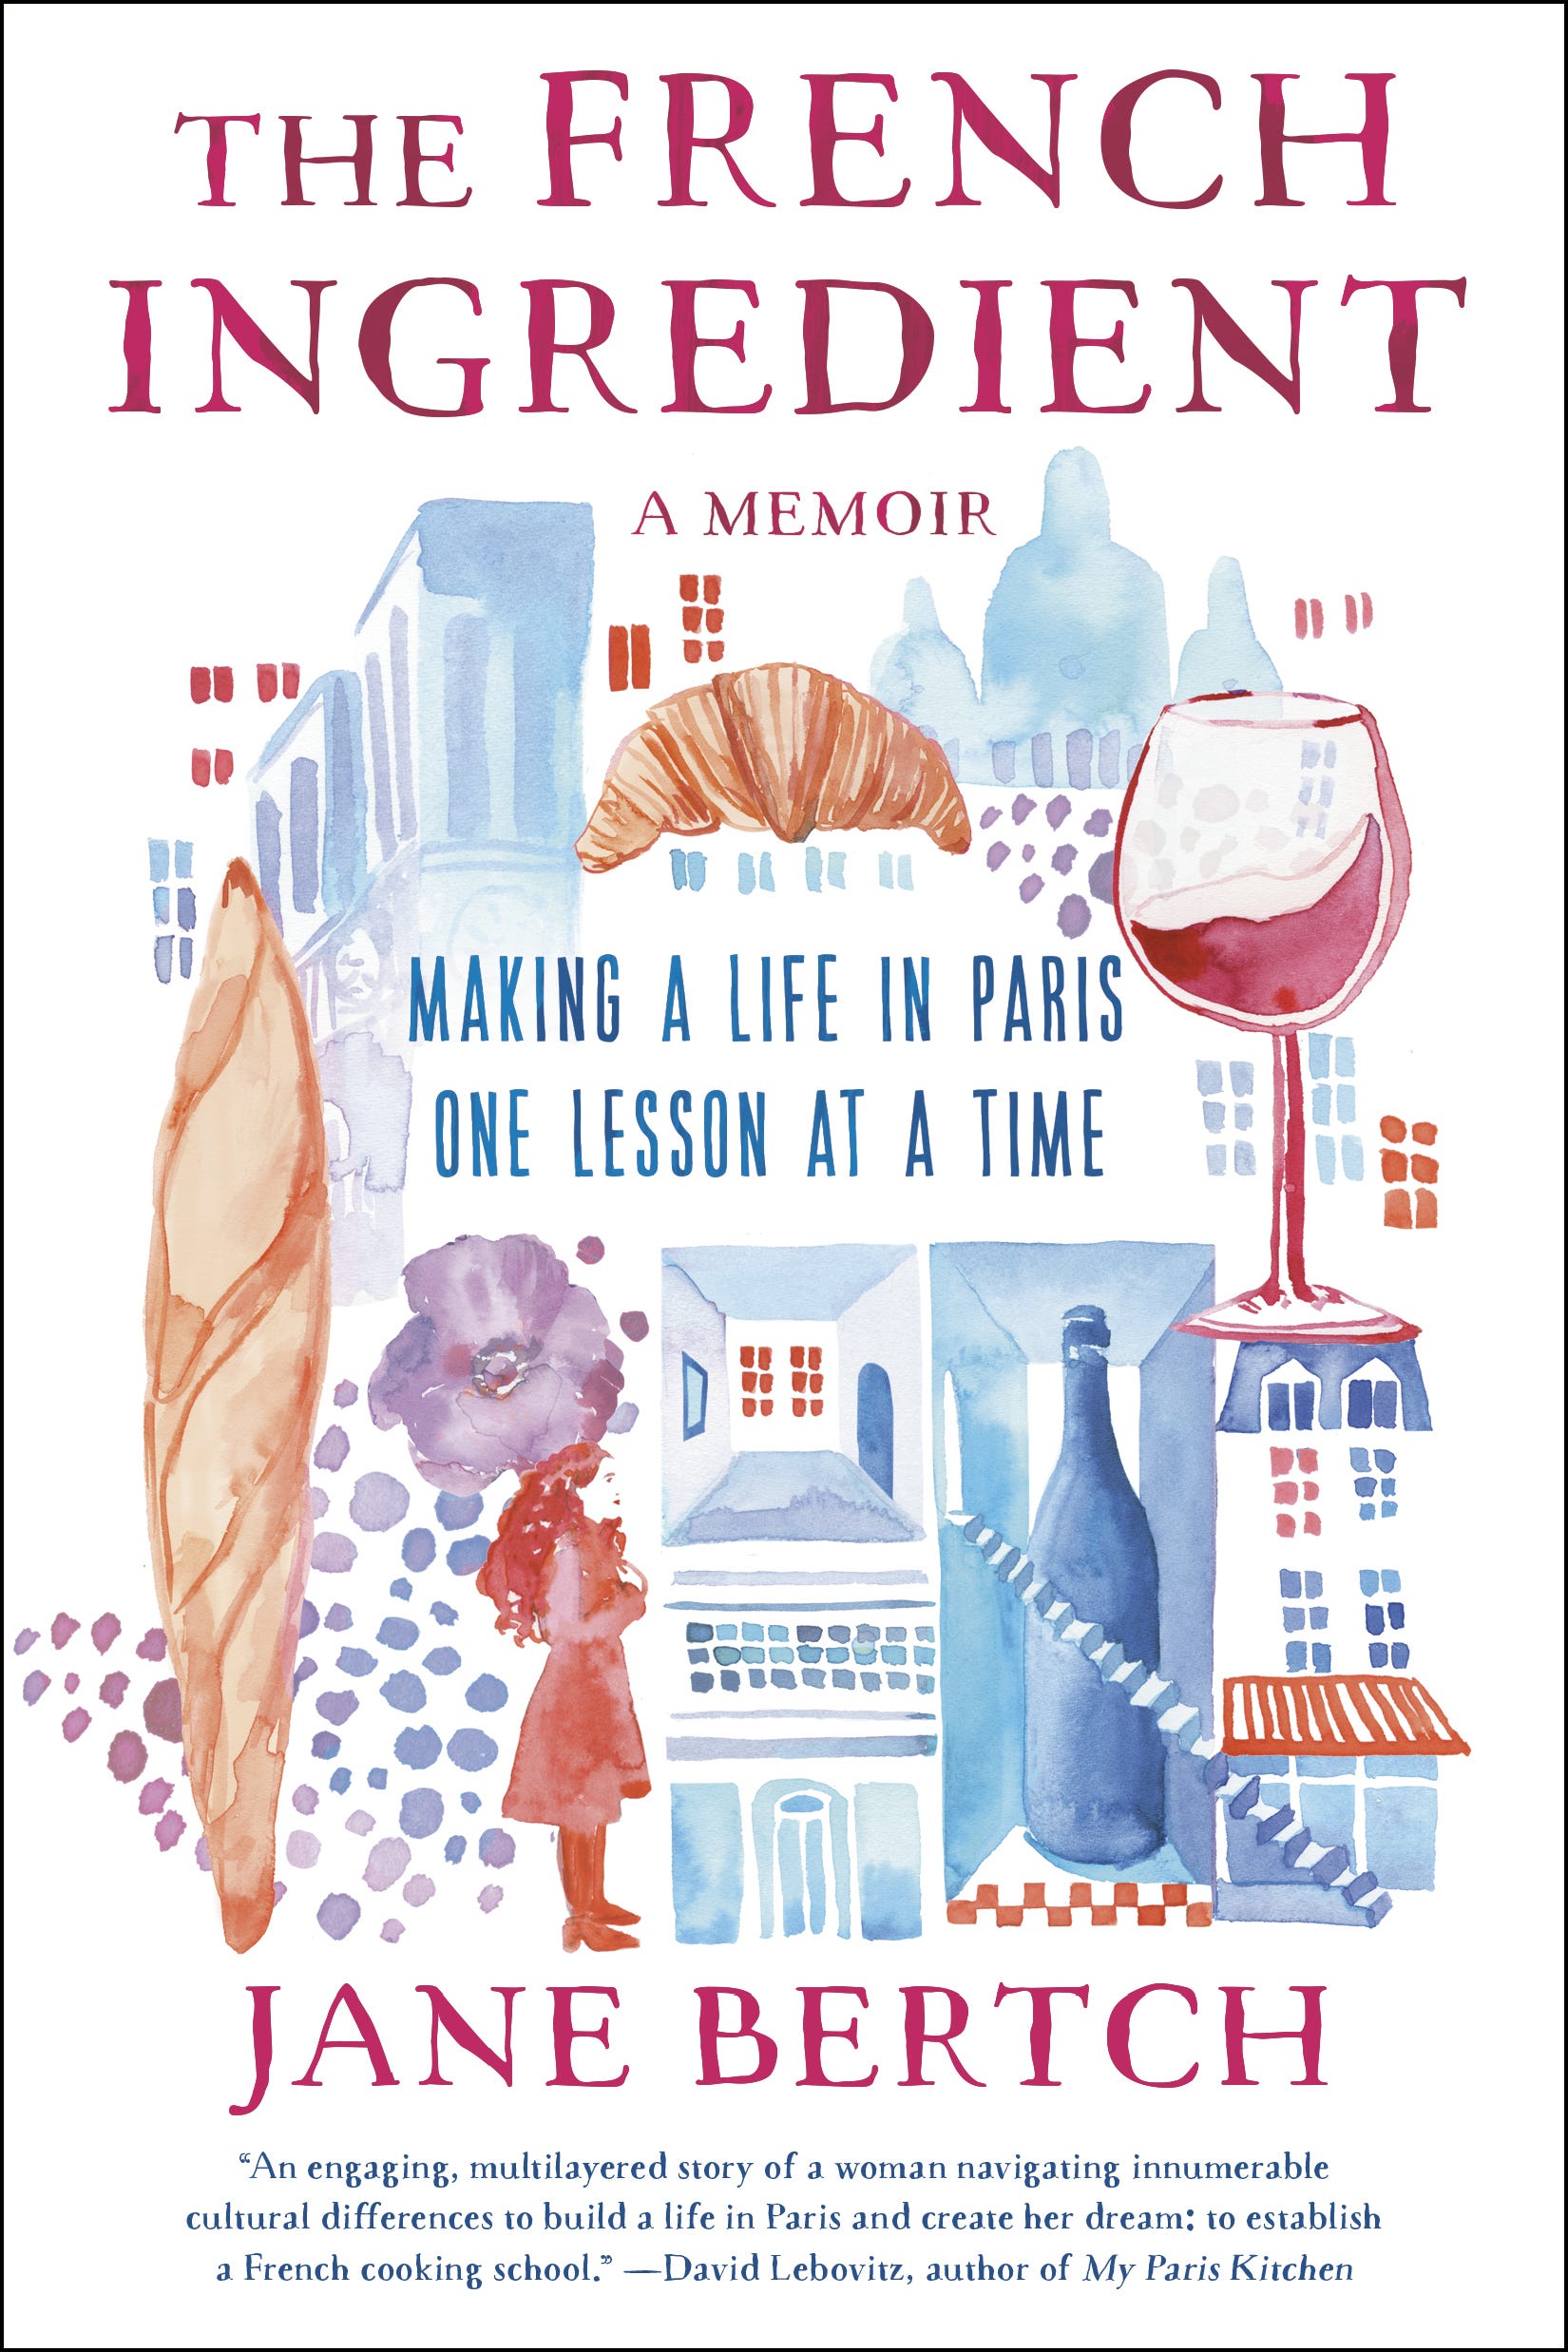 Podcast: A Chat with Jane Bertch, author of The French Ingredient: Making a Life in Paris One Lesson at a Time